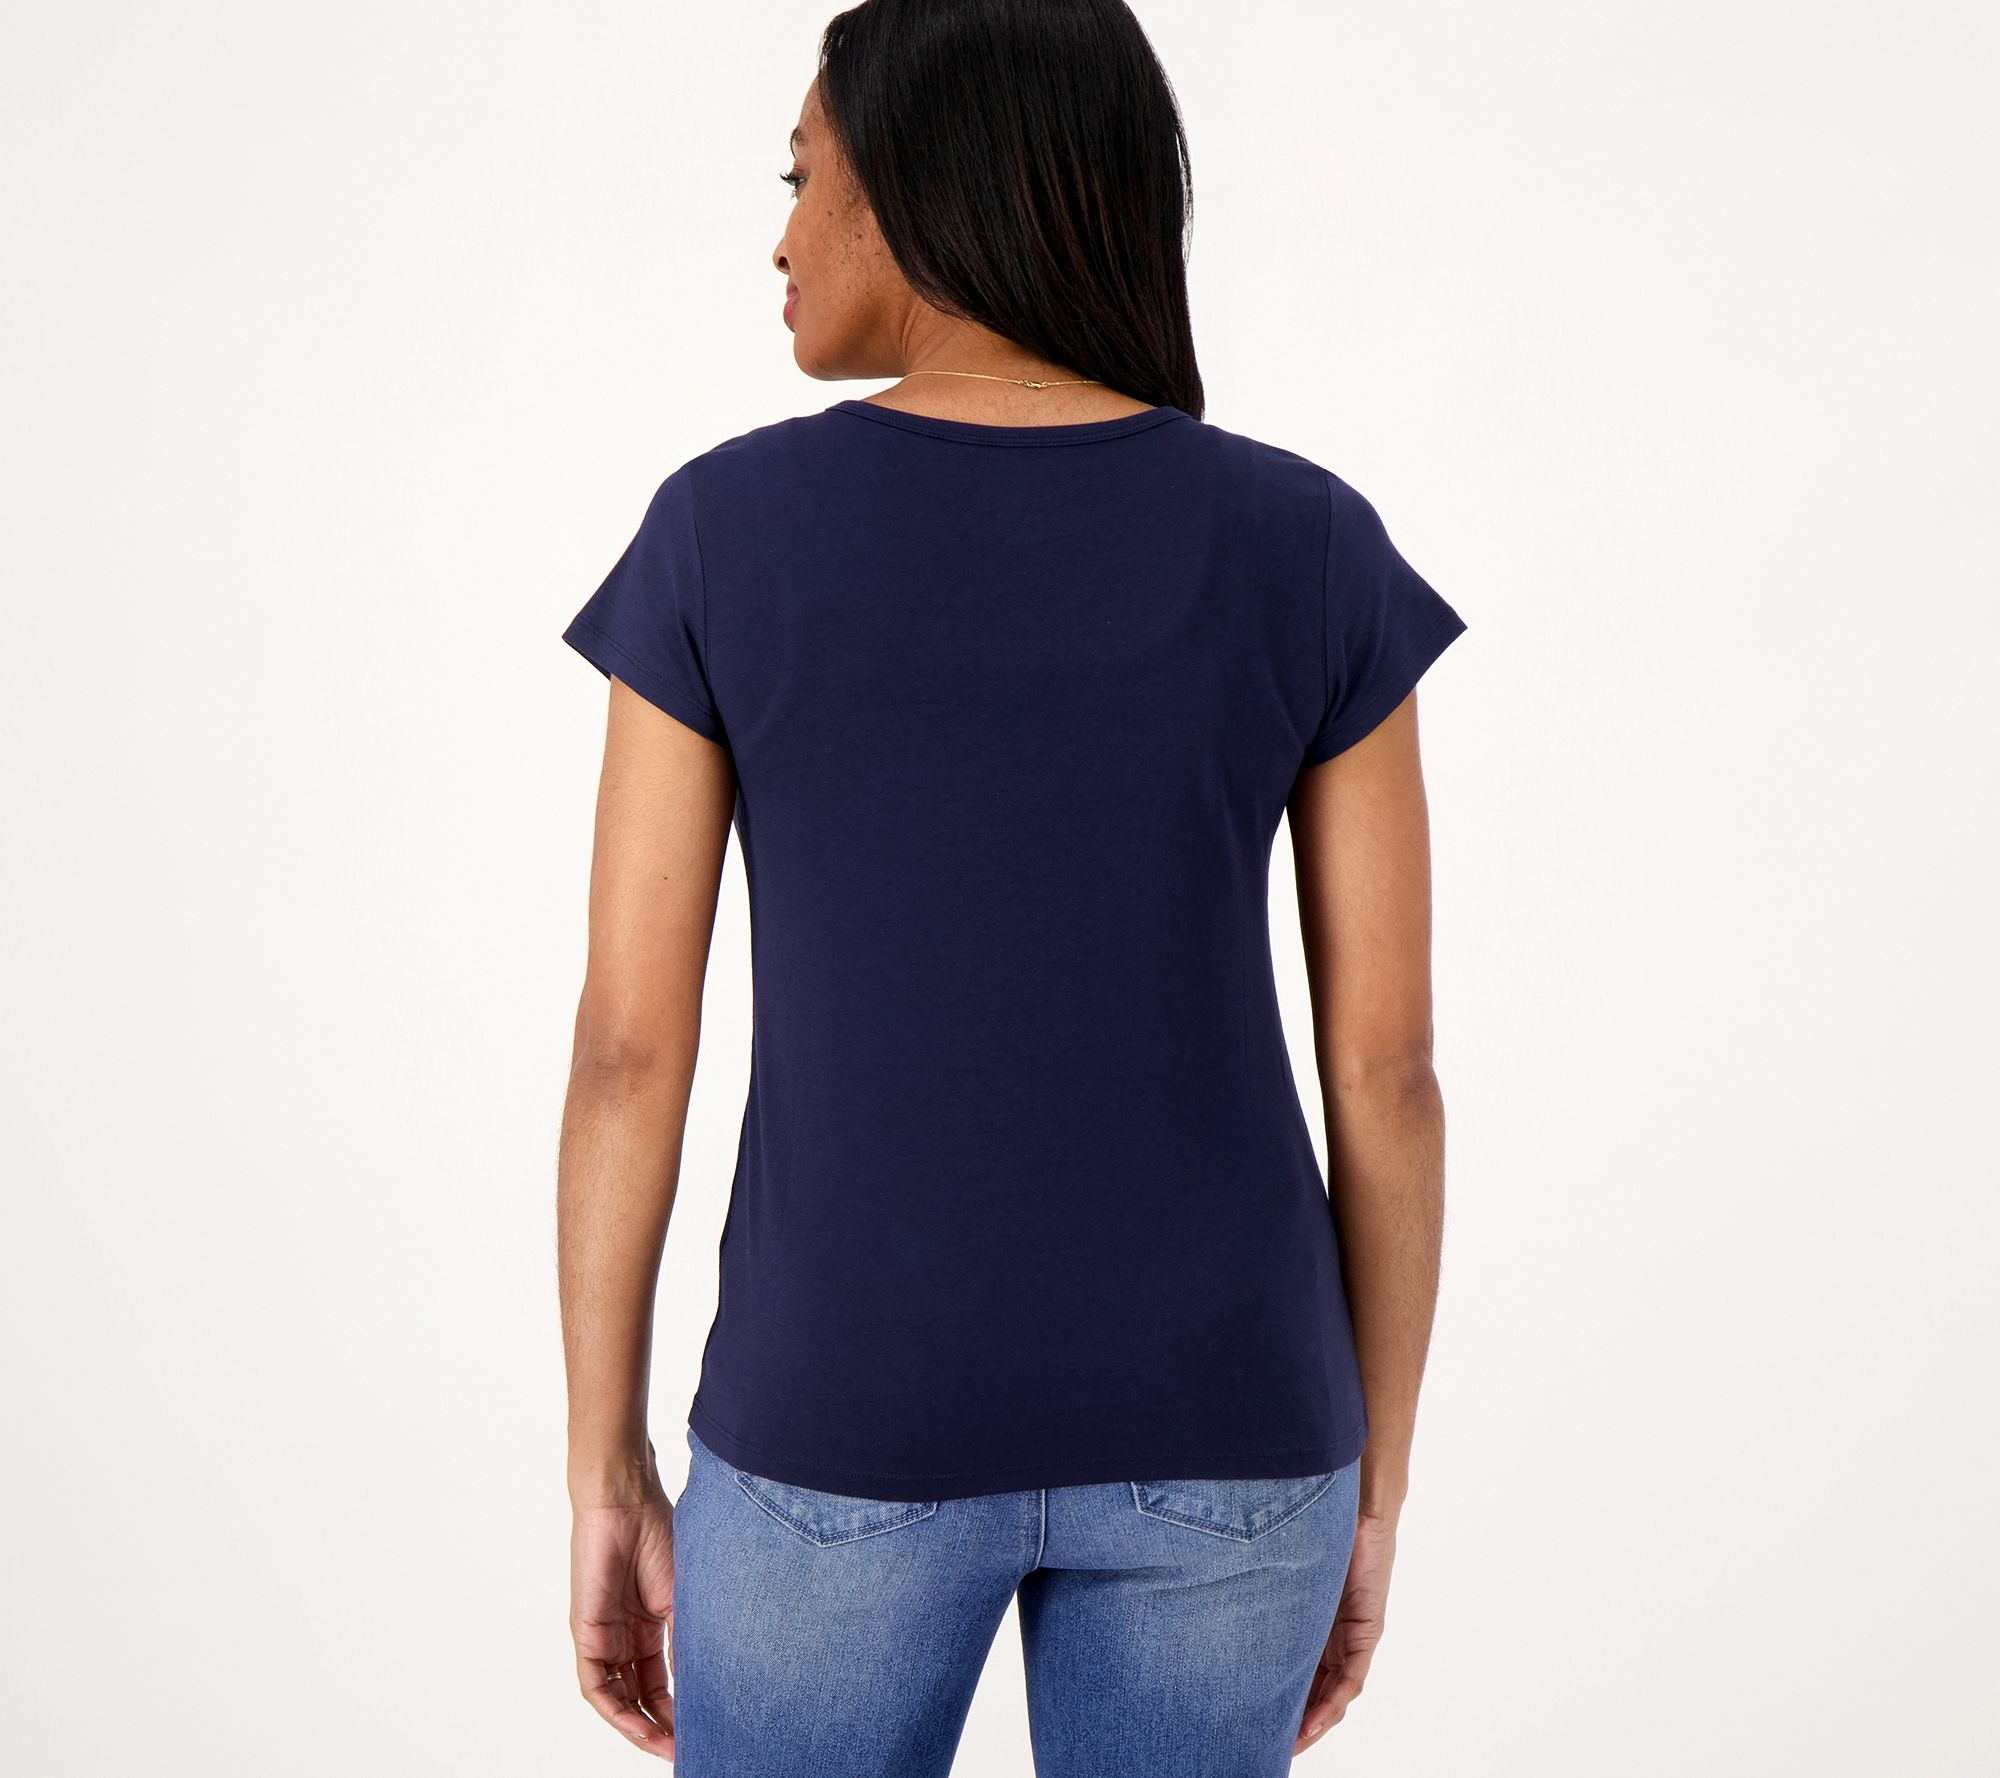 Women's Inspirational Graphic Tees at Target AND $50 GIFT CARD